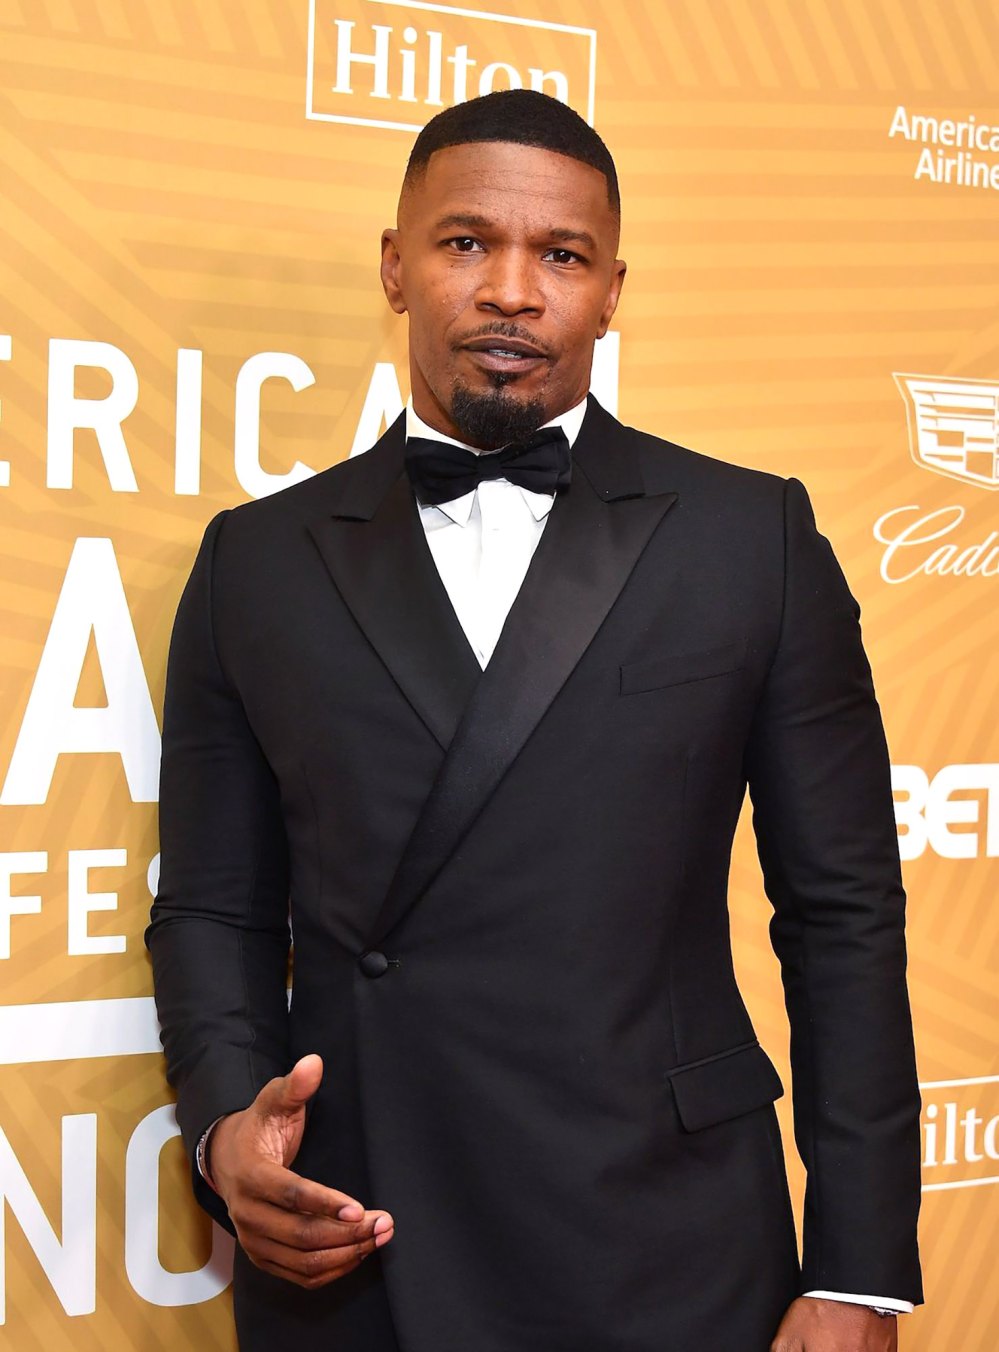 Jamie Foxx Says He Woke Up in the Hospital After Asking for an Advil